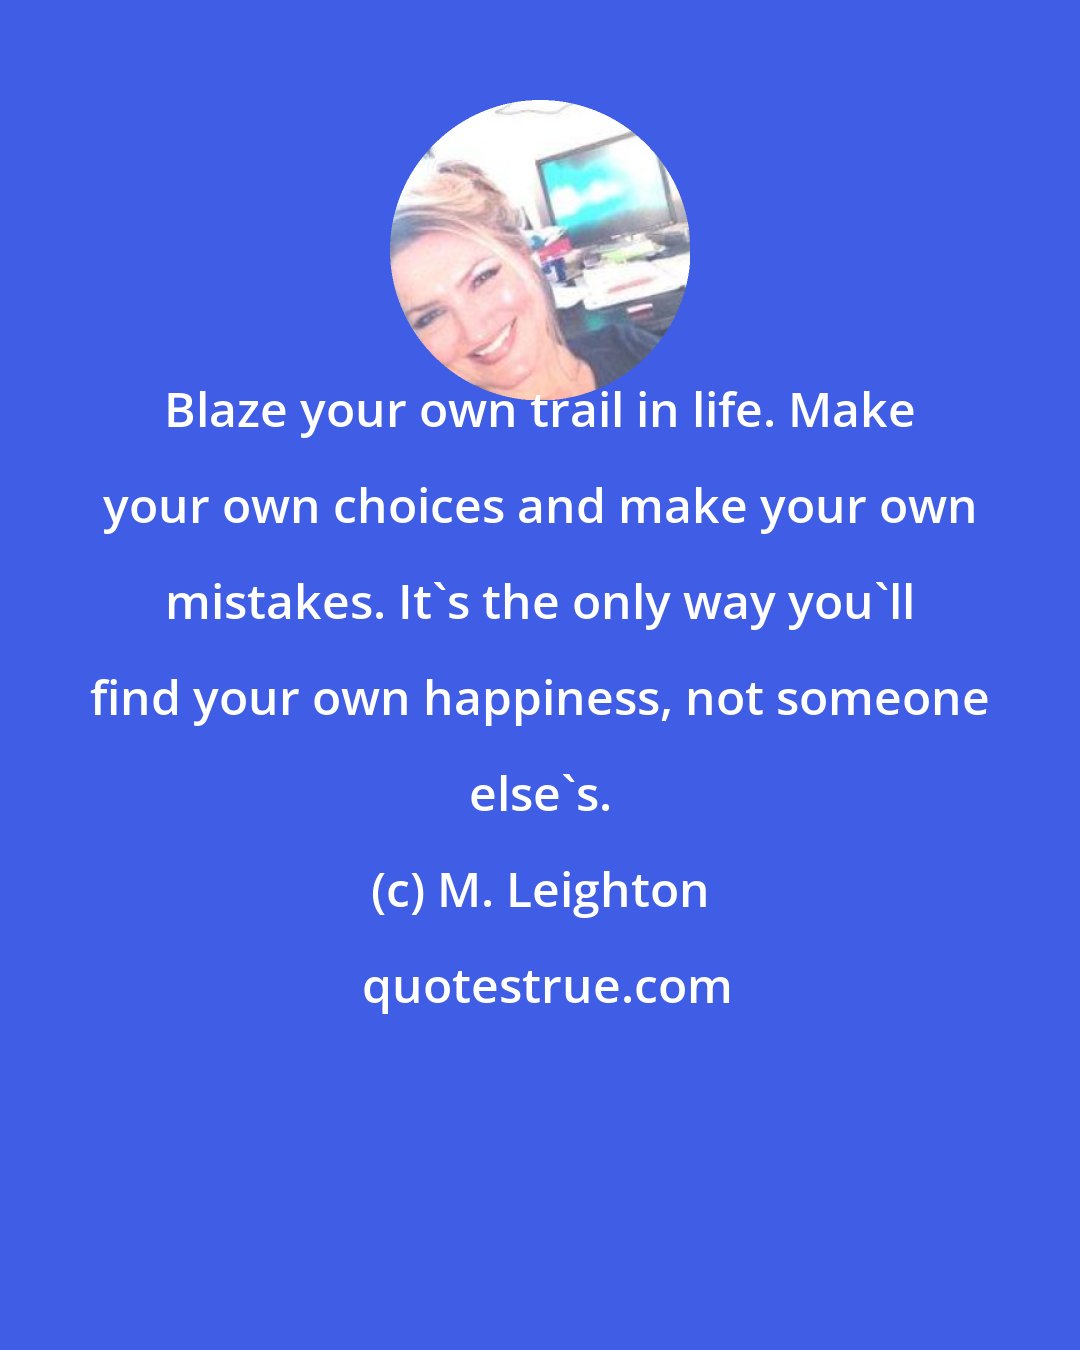 M. Leighton: Blaze your own trail in life. Make your own choices and make your own mistakes. It's the only way you'll find your own happiness, not someone else's.